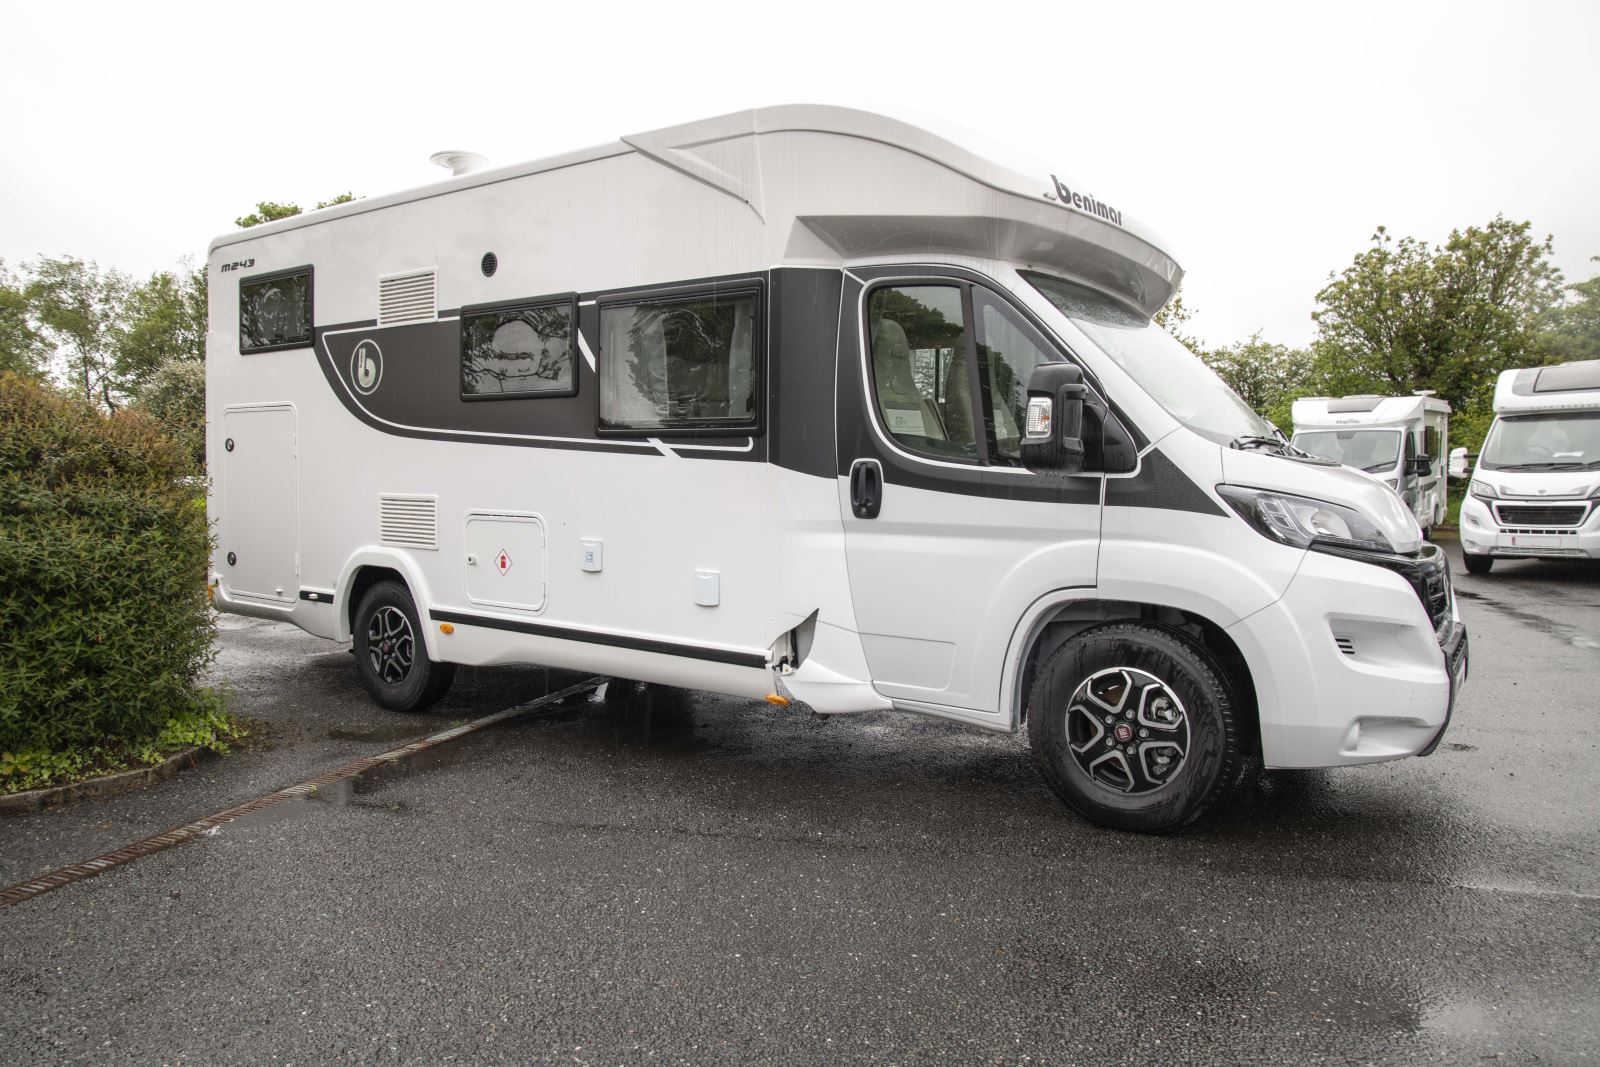 You may not need full-time motorhome insurance